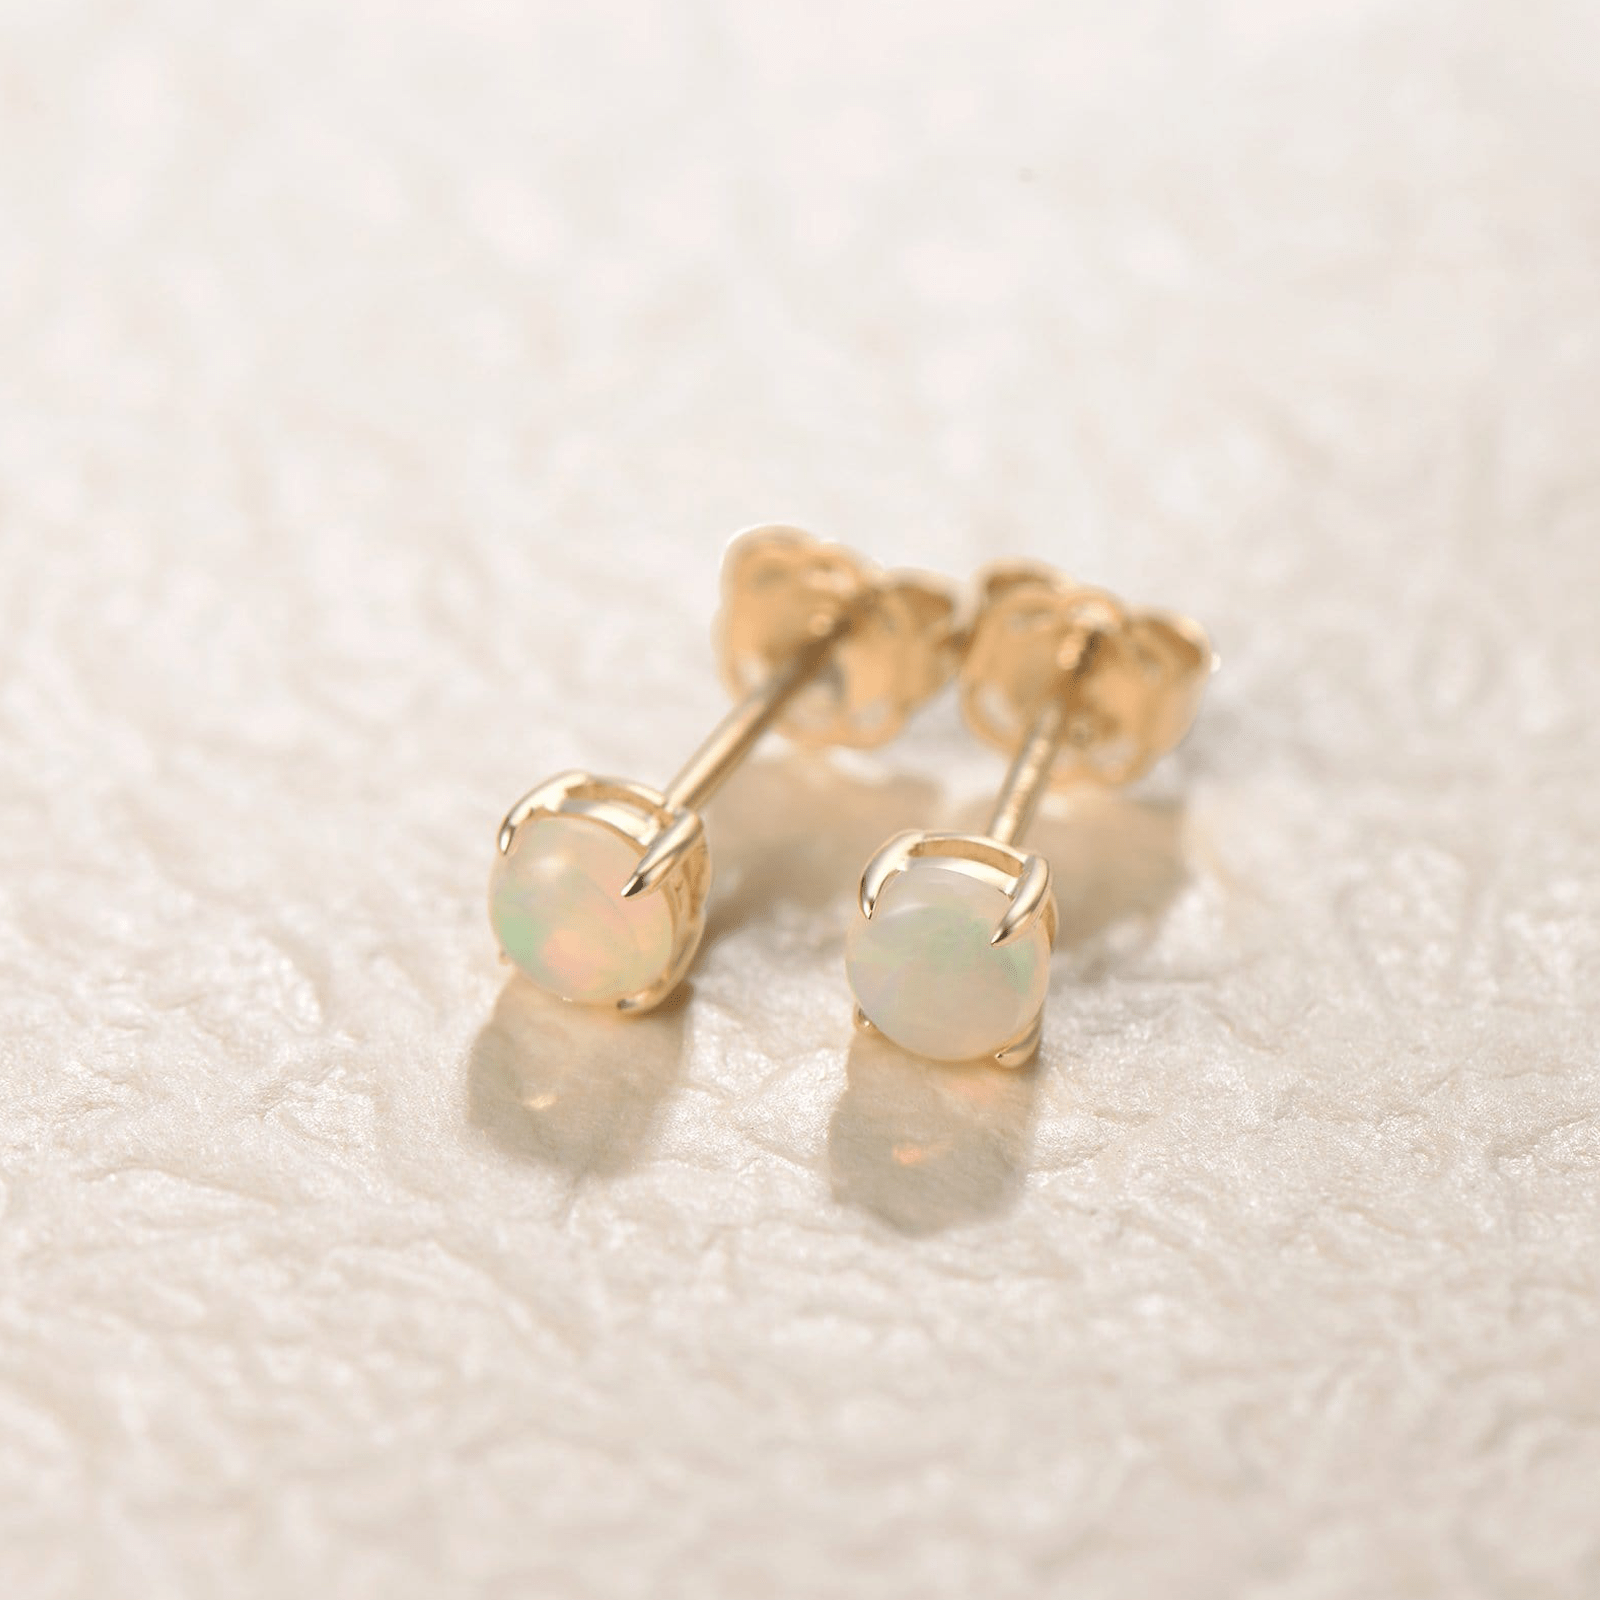 FANCIME "Lumi" Round Opal 14K Solid Yellow Gold Studs Show